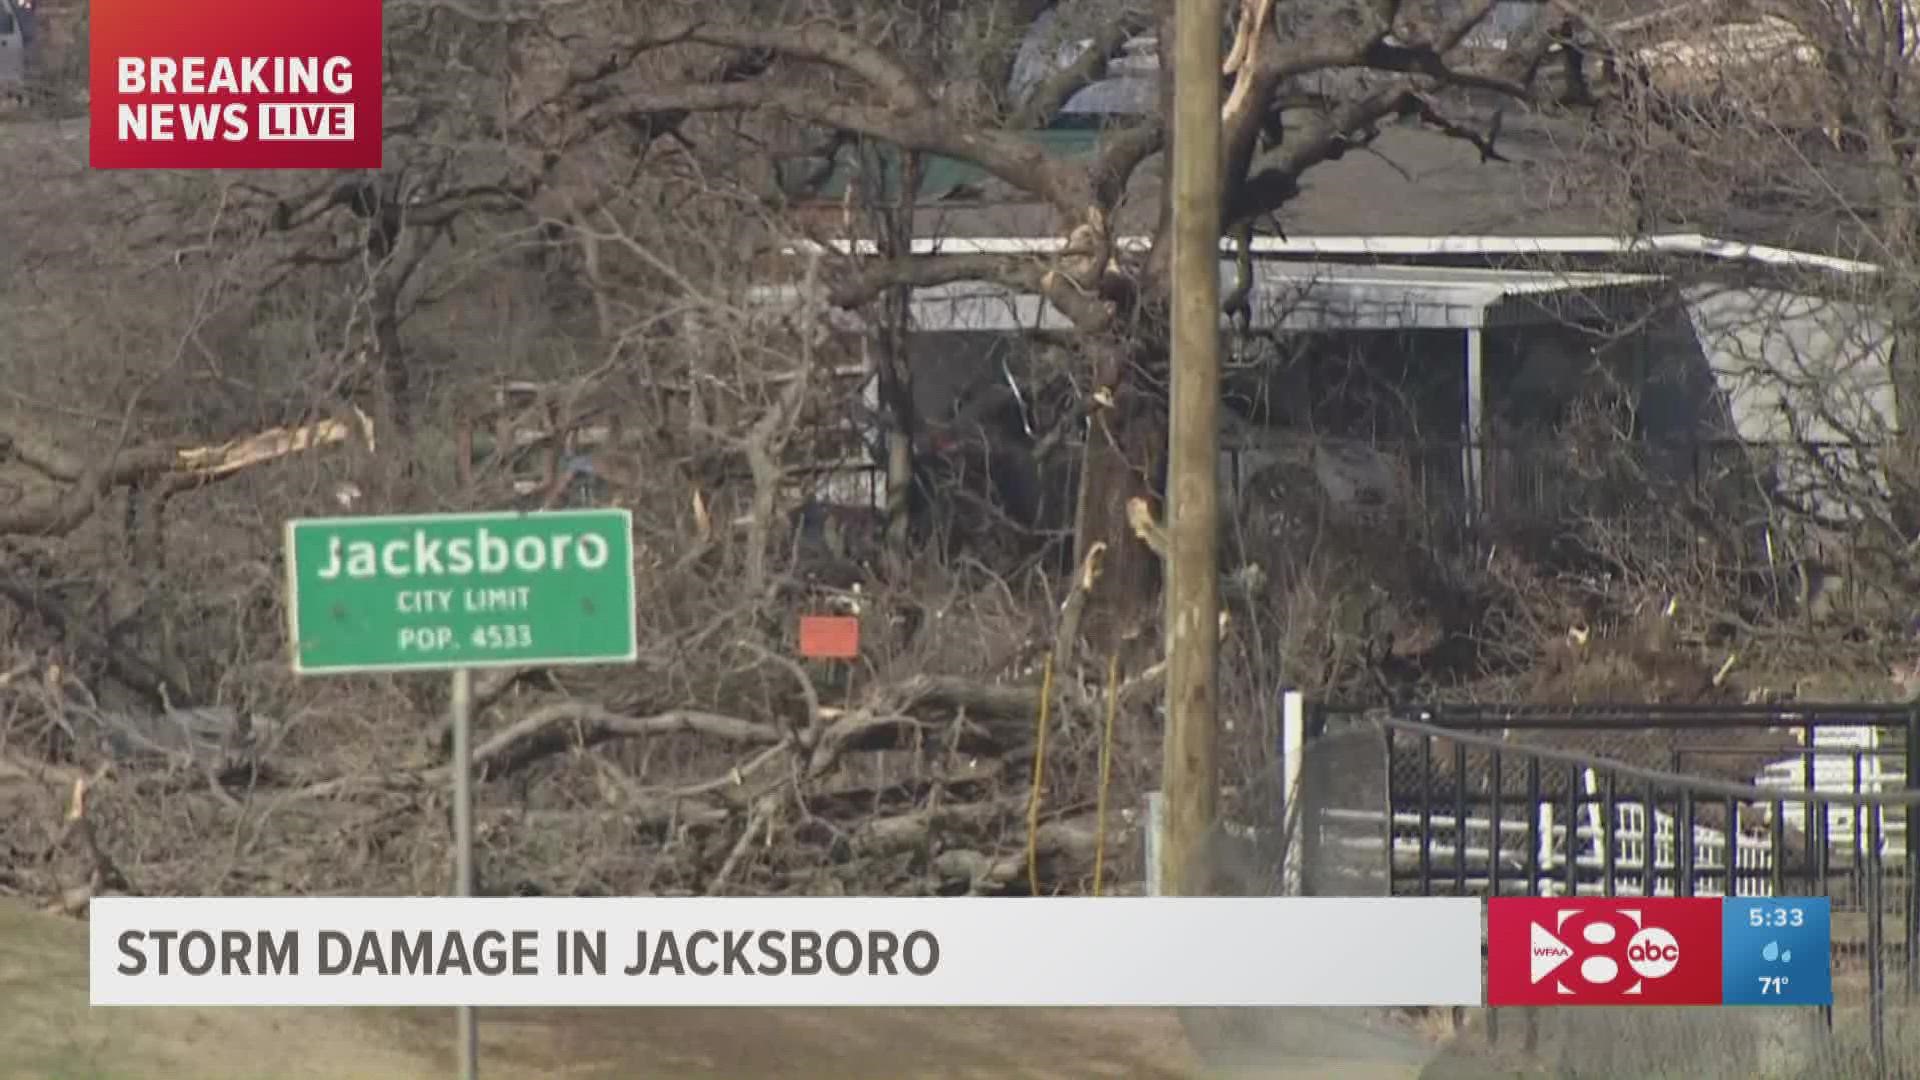 Officials are responding to damaged areas but there are no reports of injuries so far in Jacksboro, Texas.